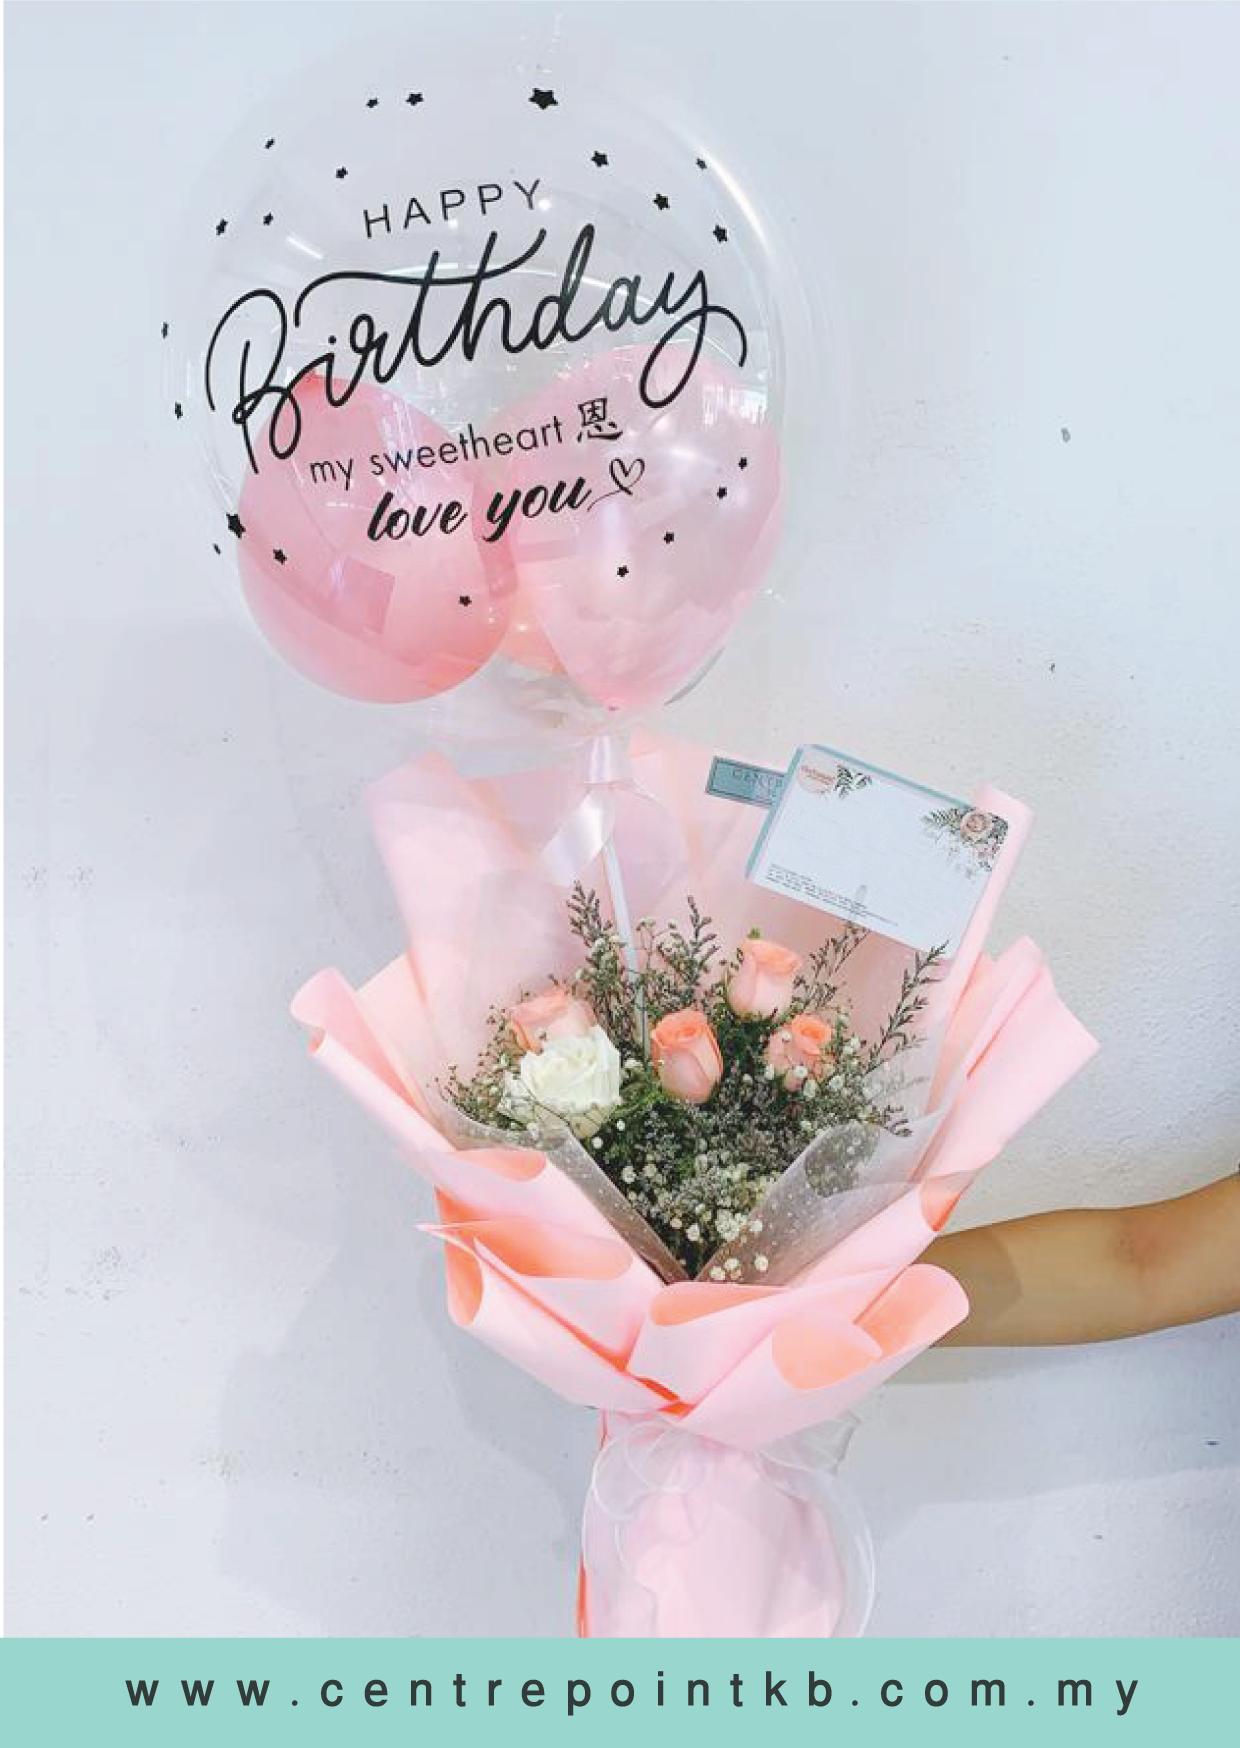 5 Roses Bouquet With Bobo Balloon (RM 110.00)